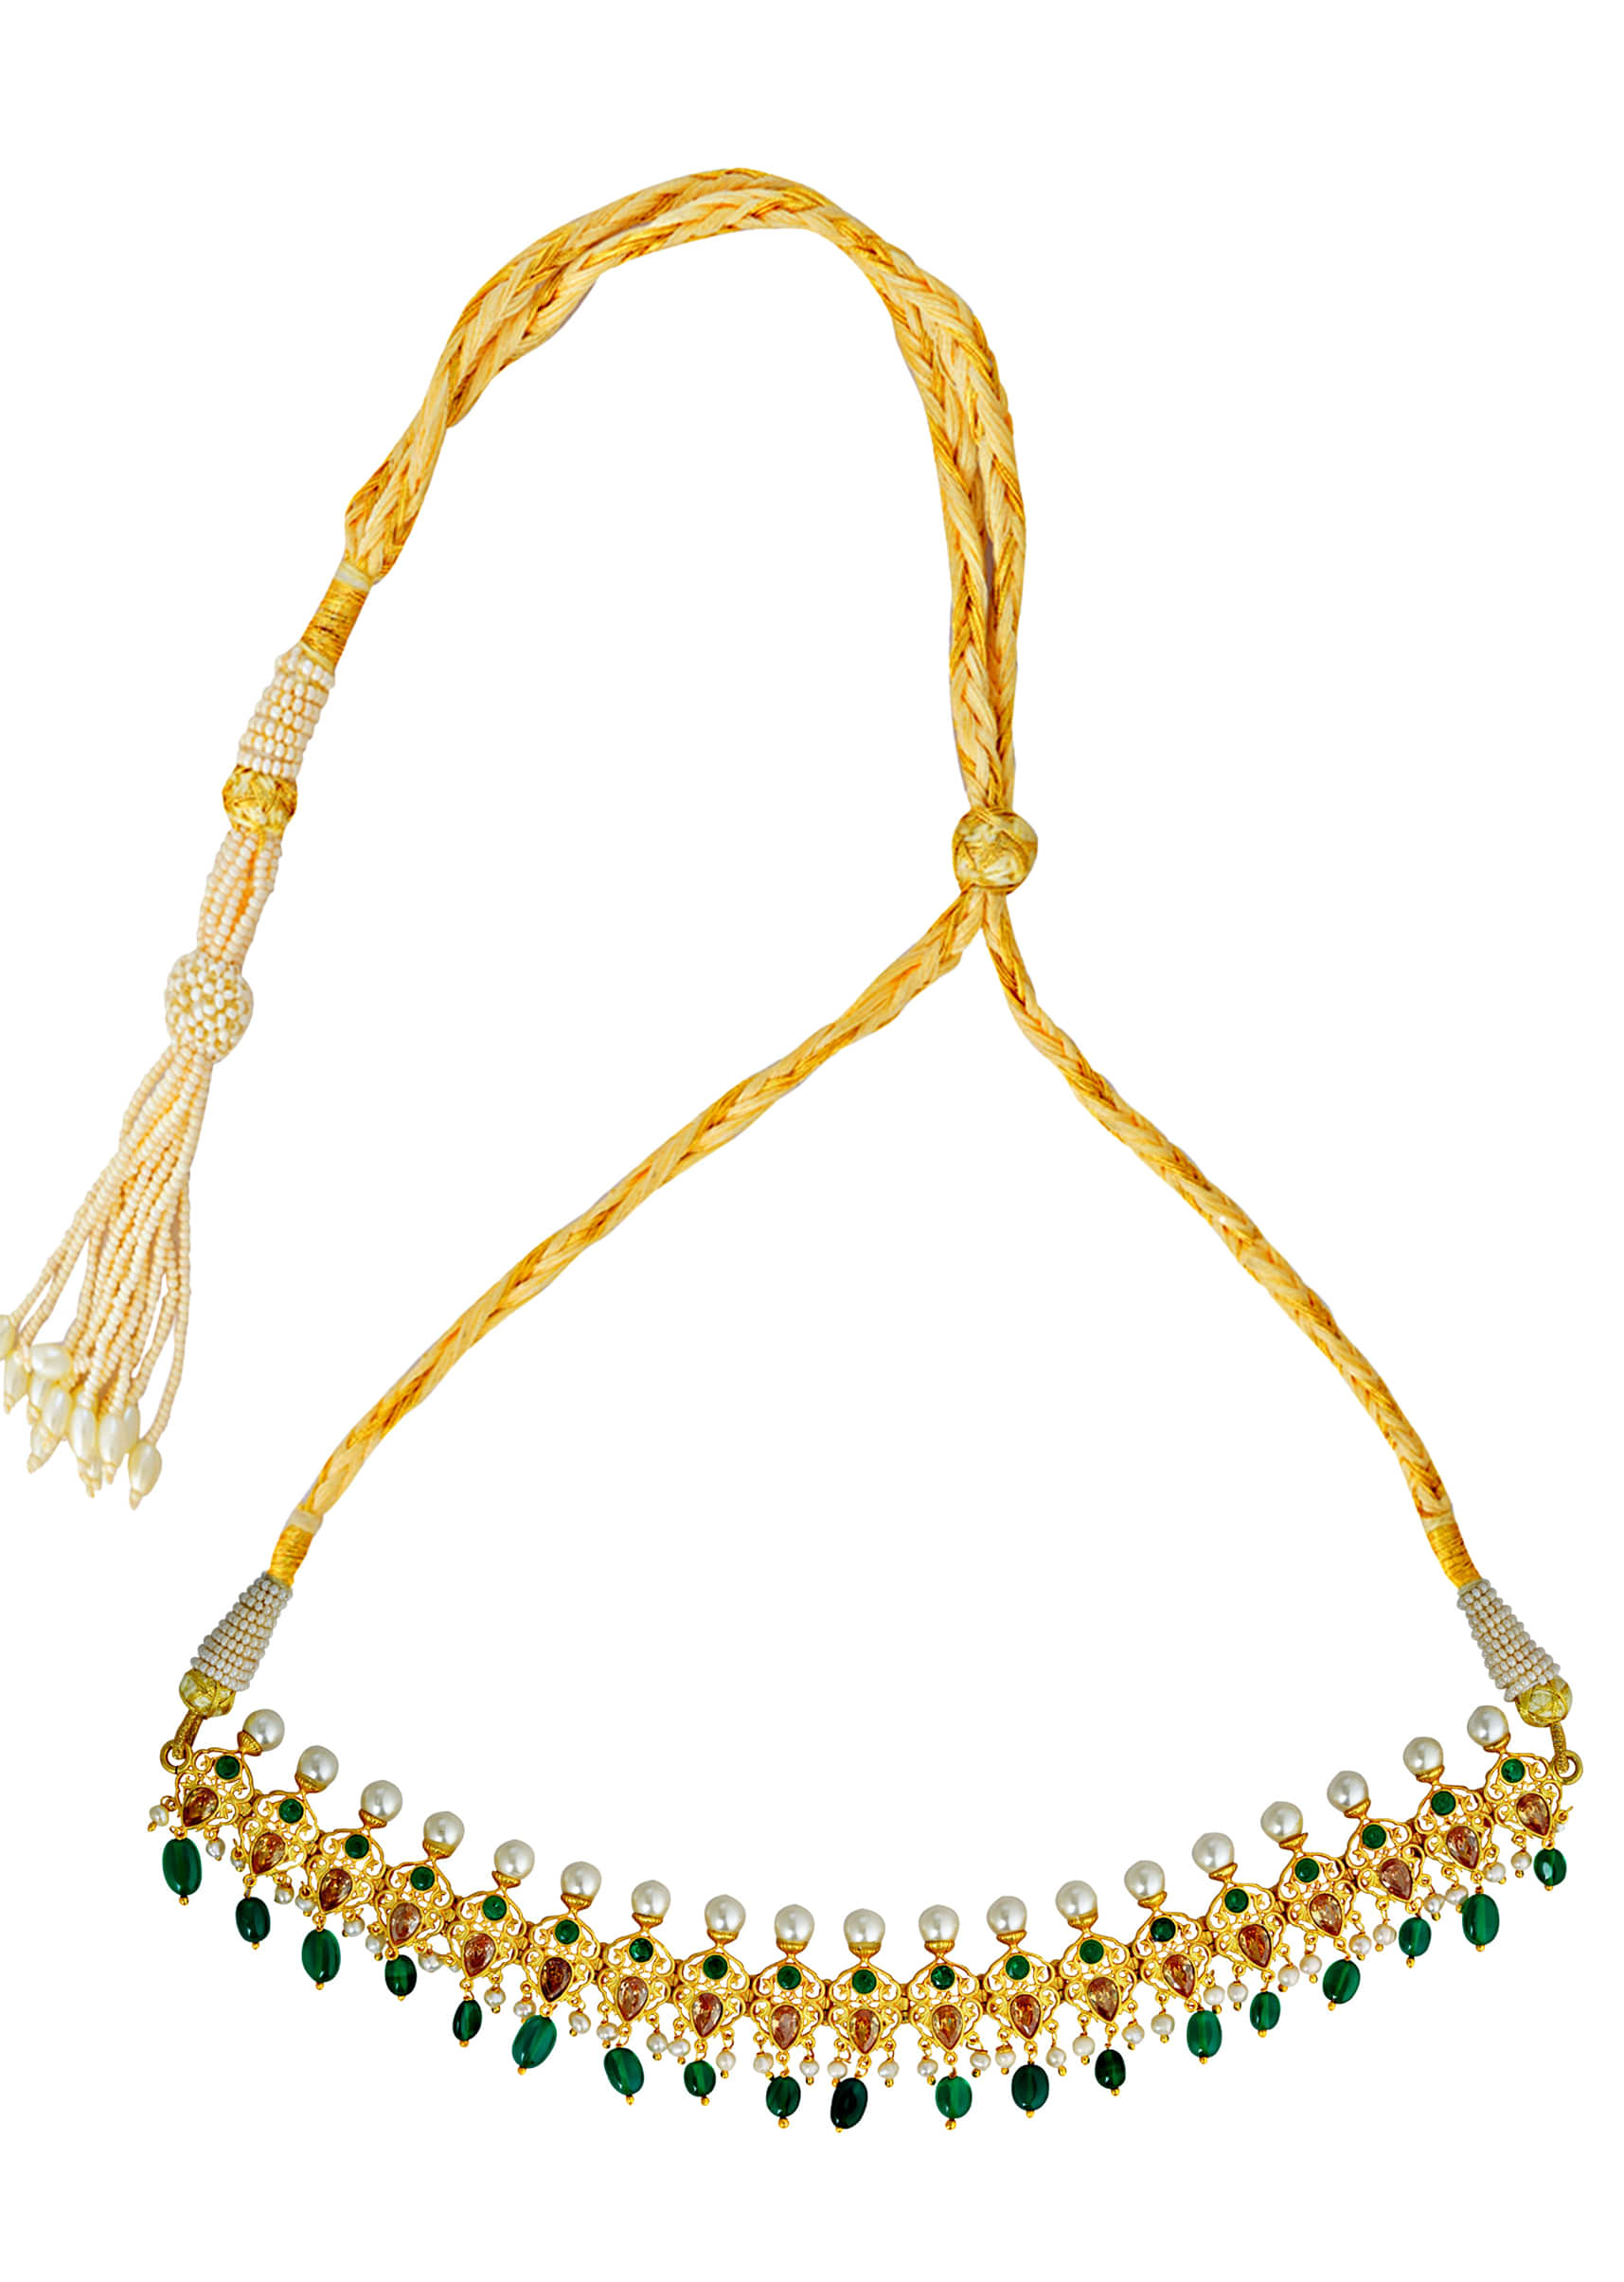 Gold Plated Choker Necklace With Green Champagne Cz, Green Onyx And Pearls By Zariin